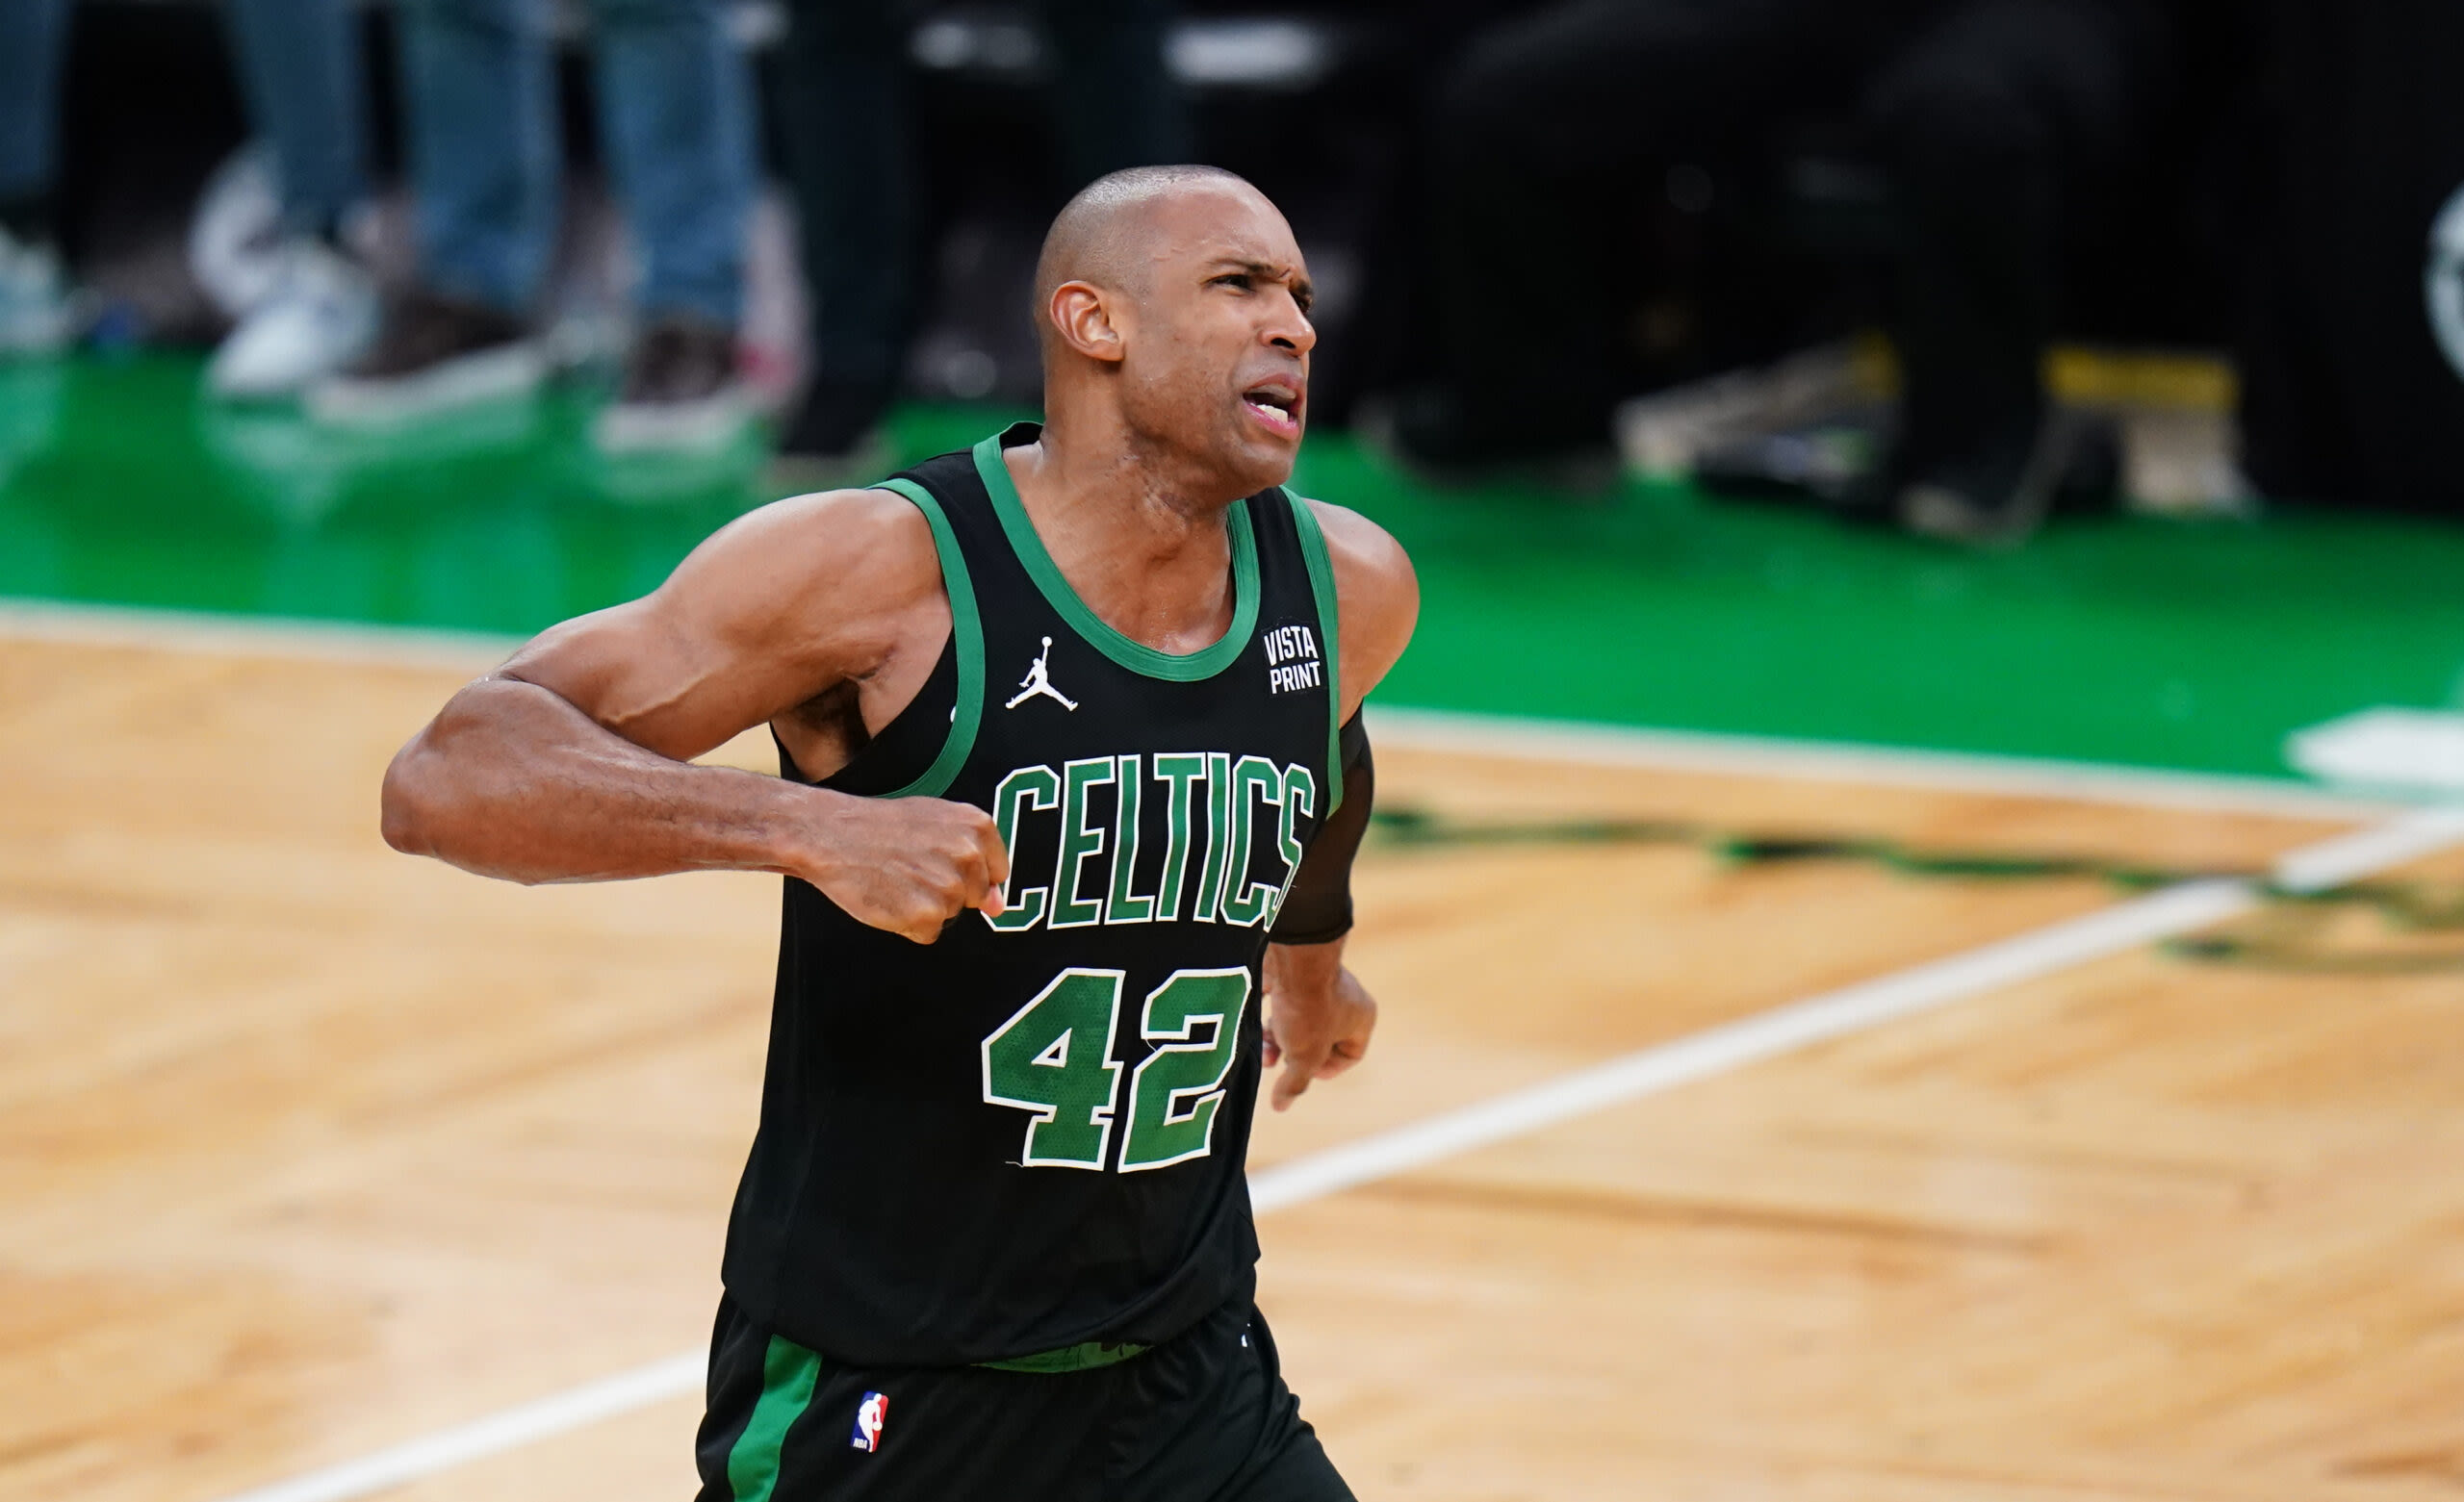 The Celtics need to manage Al Horford’s minutes in the conference finals